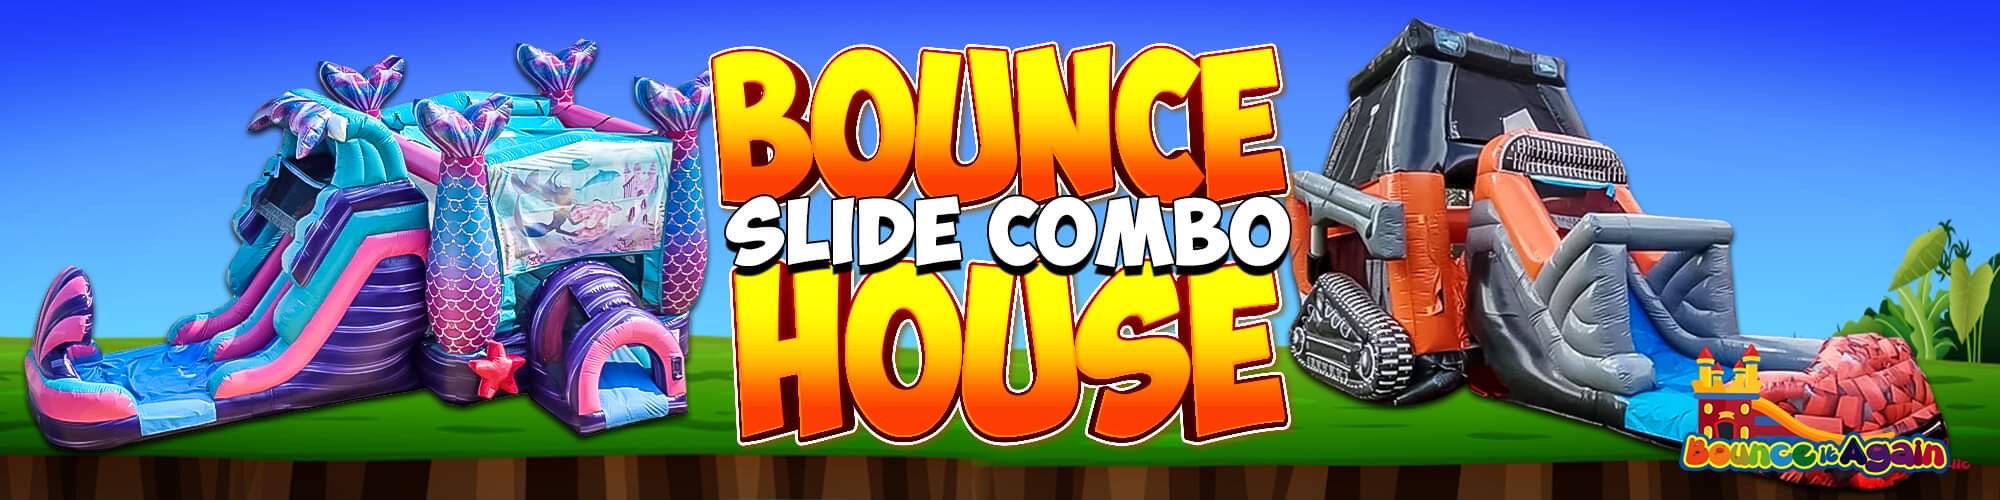 Bounce House Rentals In Haines City, FL - Bounce It Again #1 For Fun!